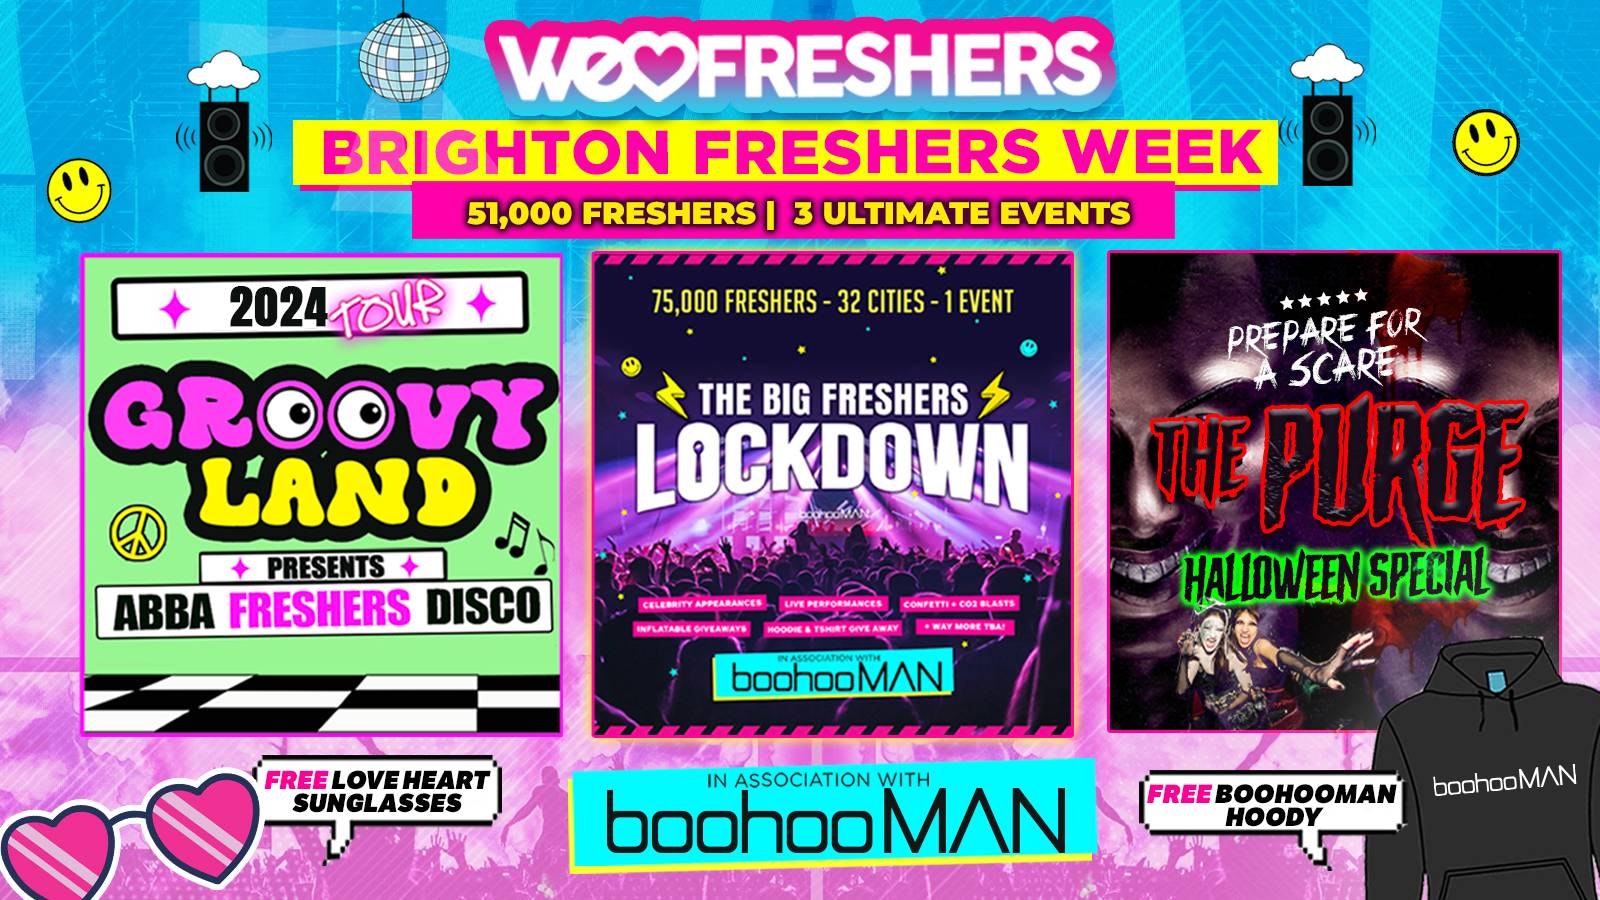 WE LOVE BRIGHTON FRESHERS 2024 in association with boohooMAN  ❗ 3 EVENTS❗